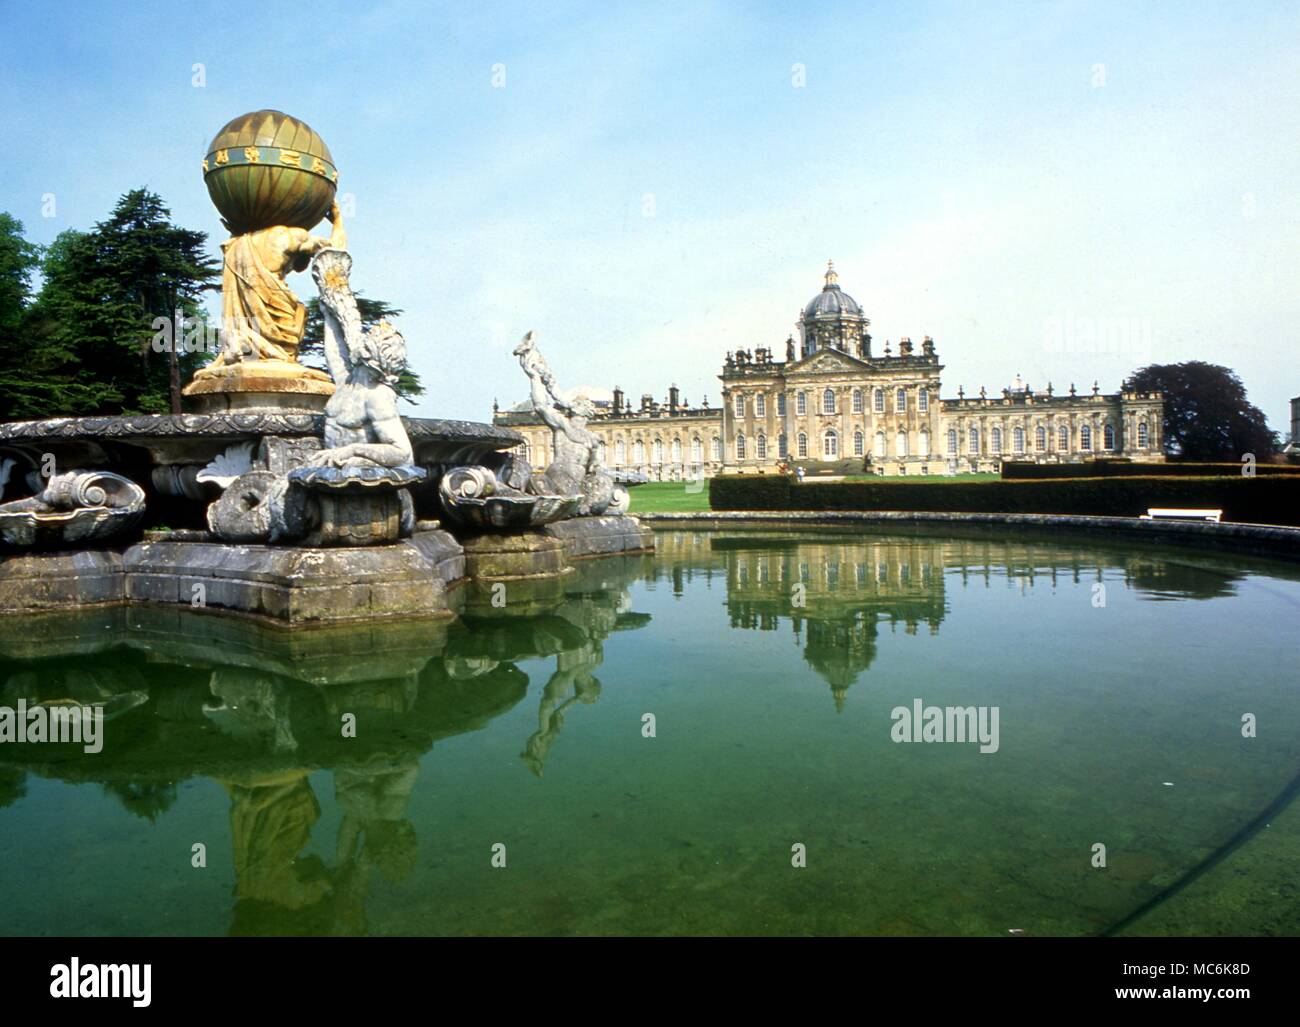 Spheres - Zodiacal Spheres. Zodiacal sphere carried by Atlas as part of the pond decoration at Castle Howard. 19th century, probably French. Panoramic view Stock Photo